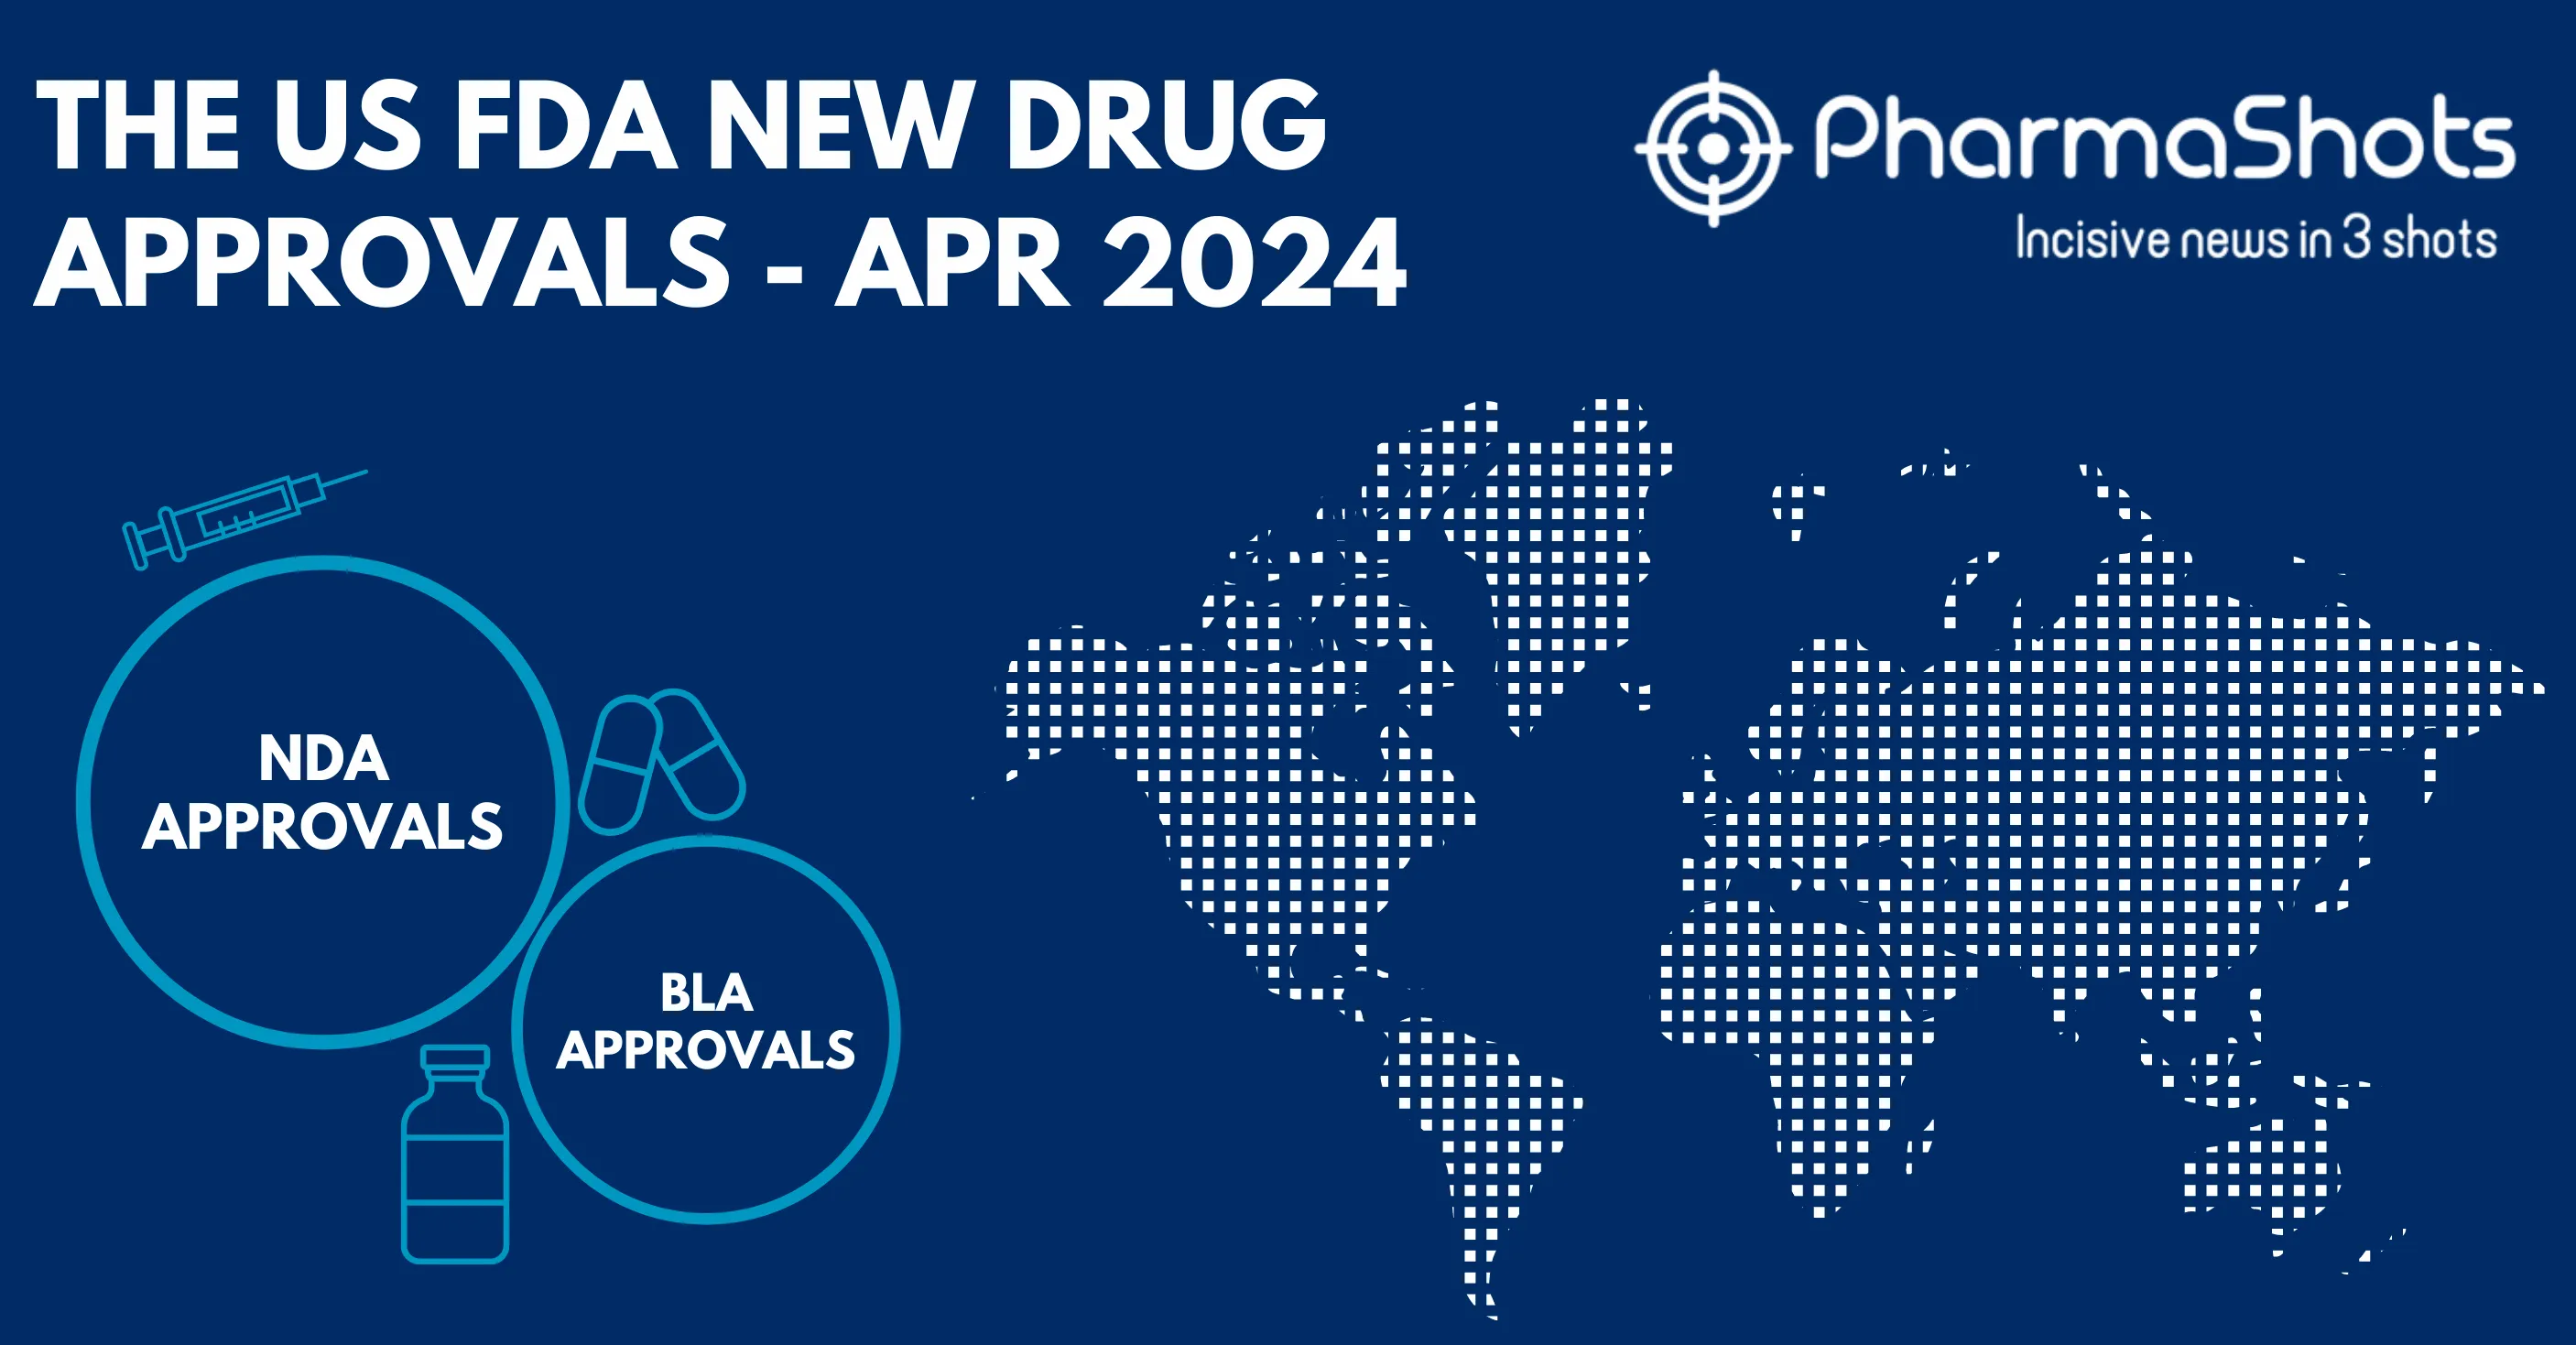 Insights+: The US FDA New Drug Approvals in April 2024